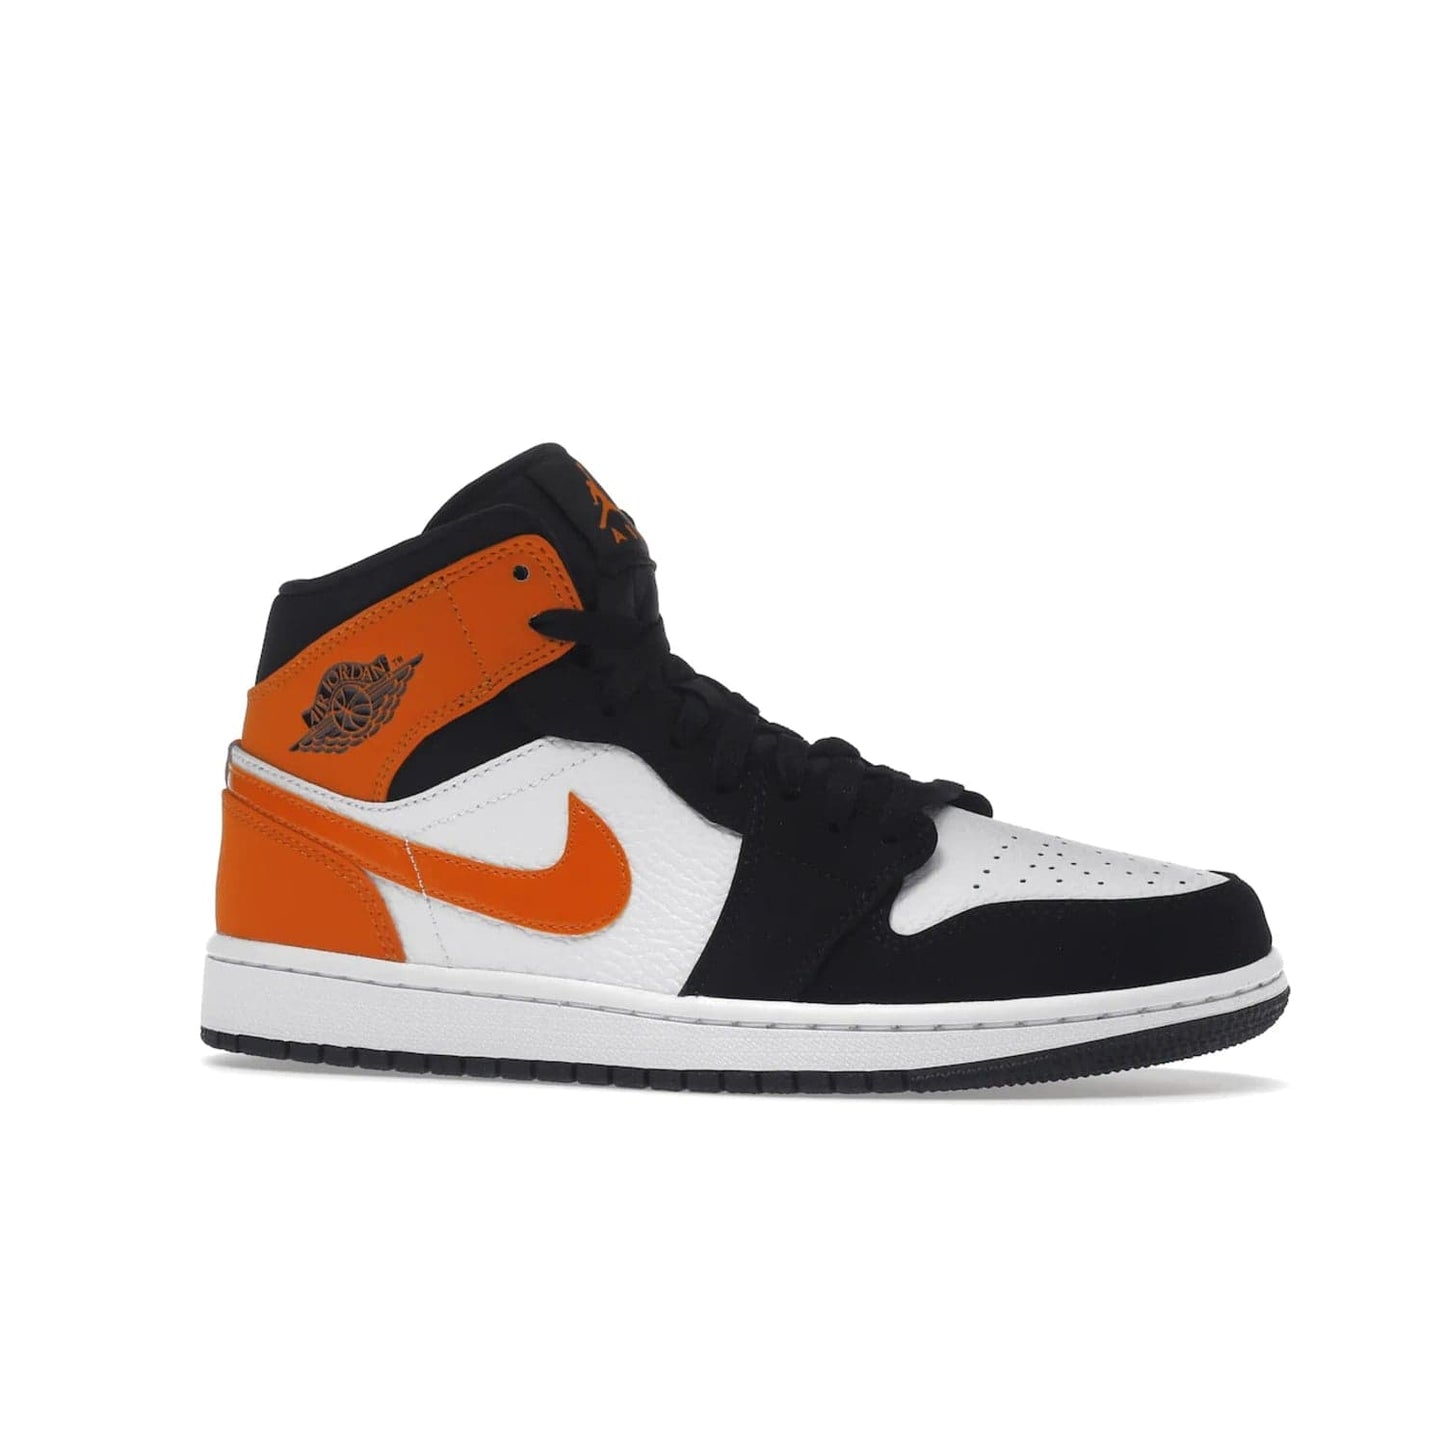 Jordan 1 Mid Shattered Backboard - Image 3 - Only at www.BallersClubKickz.com - The Air Jordan 1 Mid Shattered Backboard offers a timeless Black/White-Starfish colorway. Classic Swoosh logo and AJ insignia plus a shatterd backboard graphic on the insole. Get your pair today!